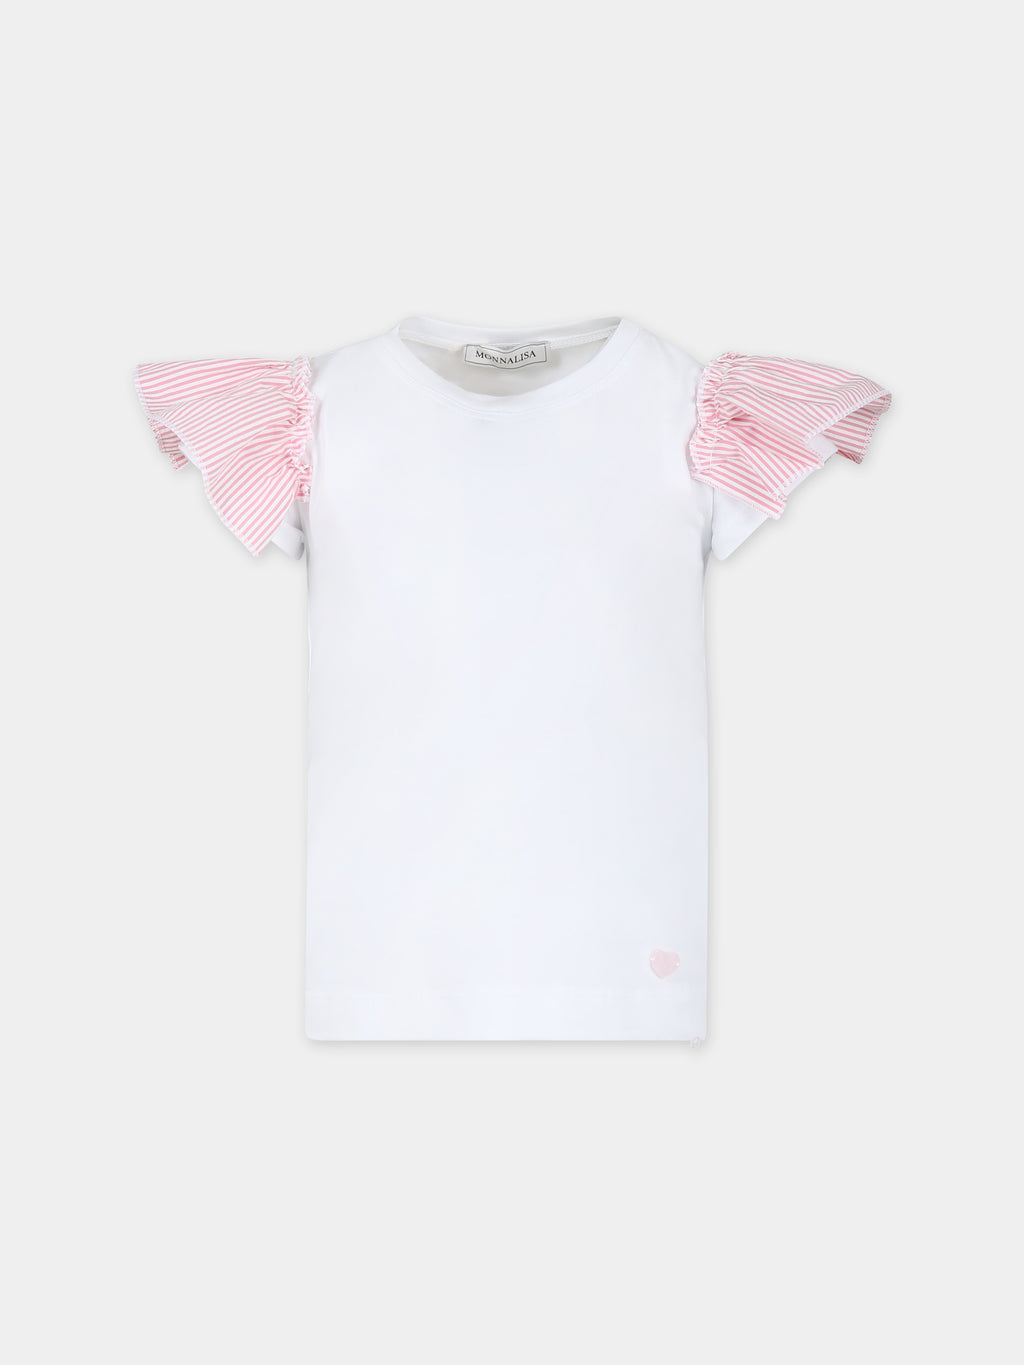 White t-shirt for girl with pink heart